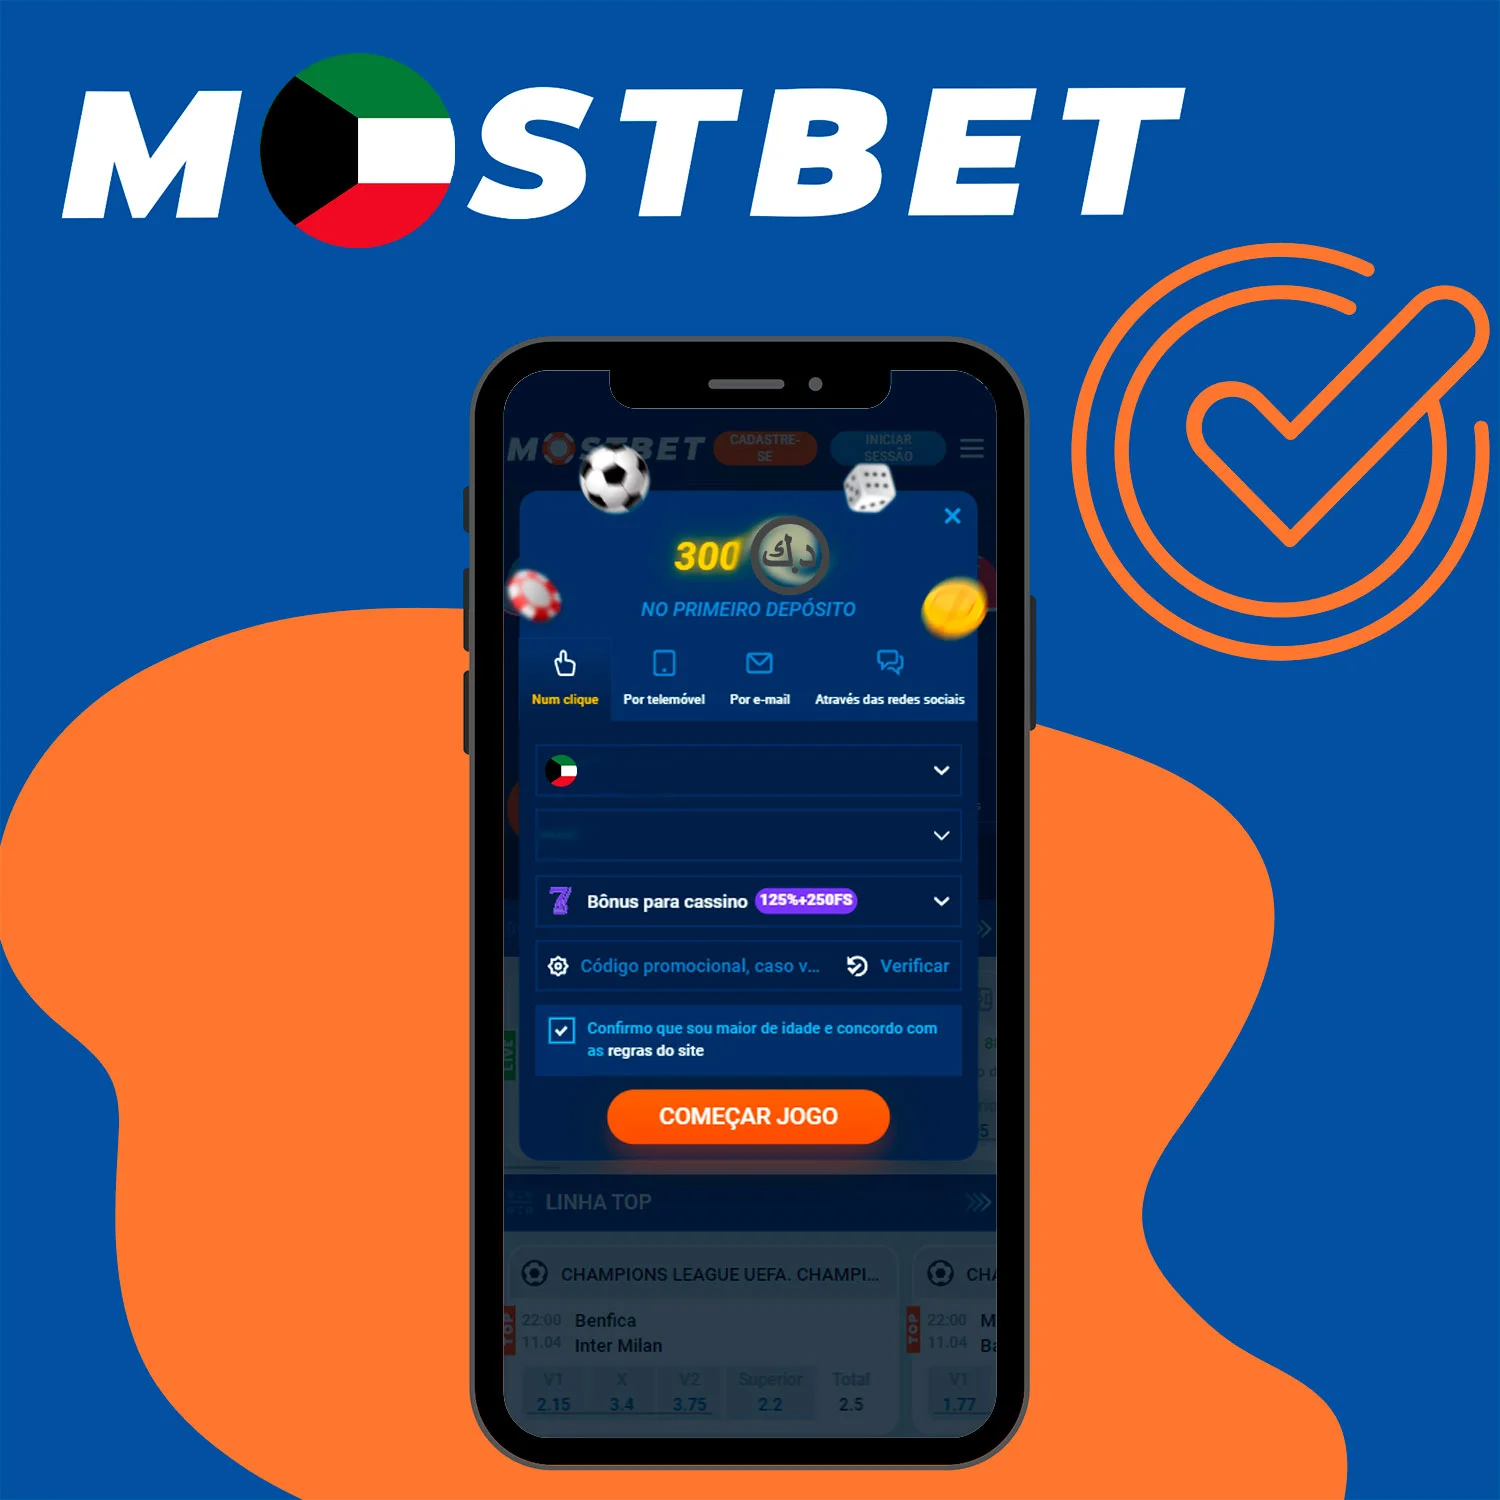 11 Ways To Reinvent Your The Mostbet APK is a robust choice for Android users who want to engage in online betting. With its wide range of features, user-friendly interface, and commitment to security, it provides an excellent betting experience. The detailed review serves as a v